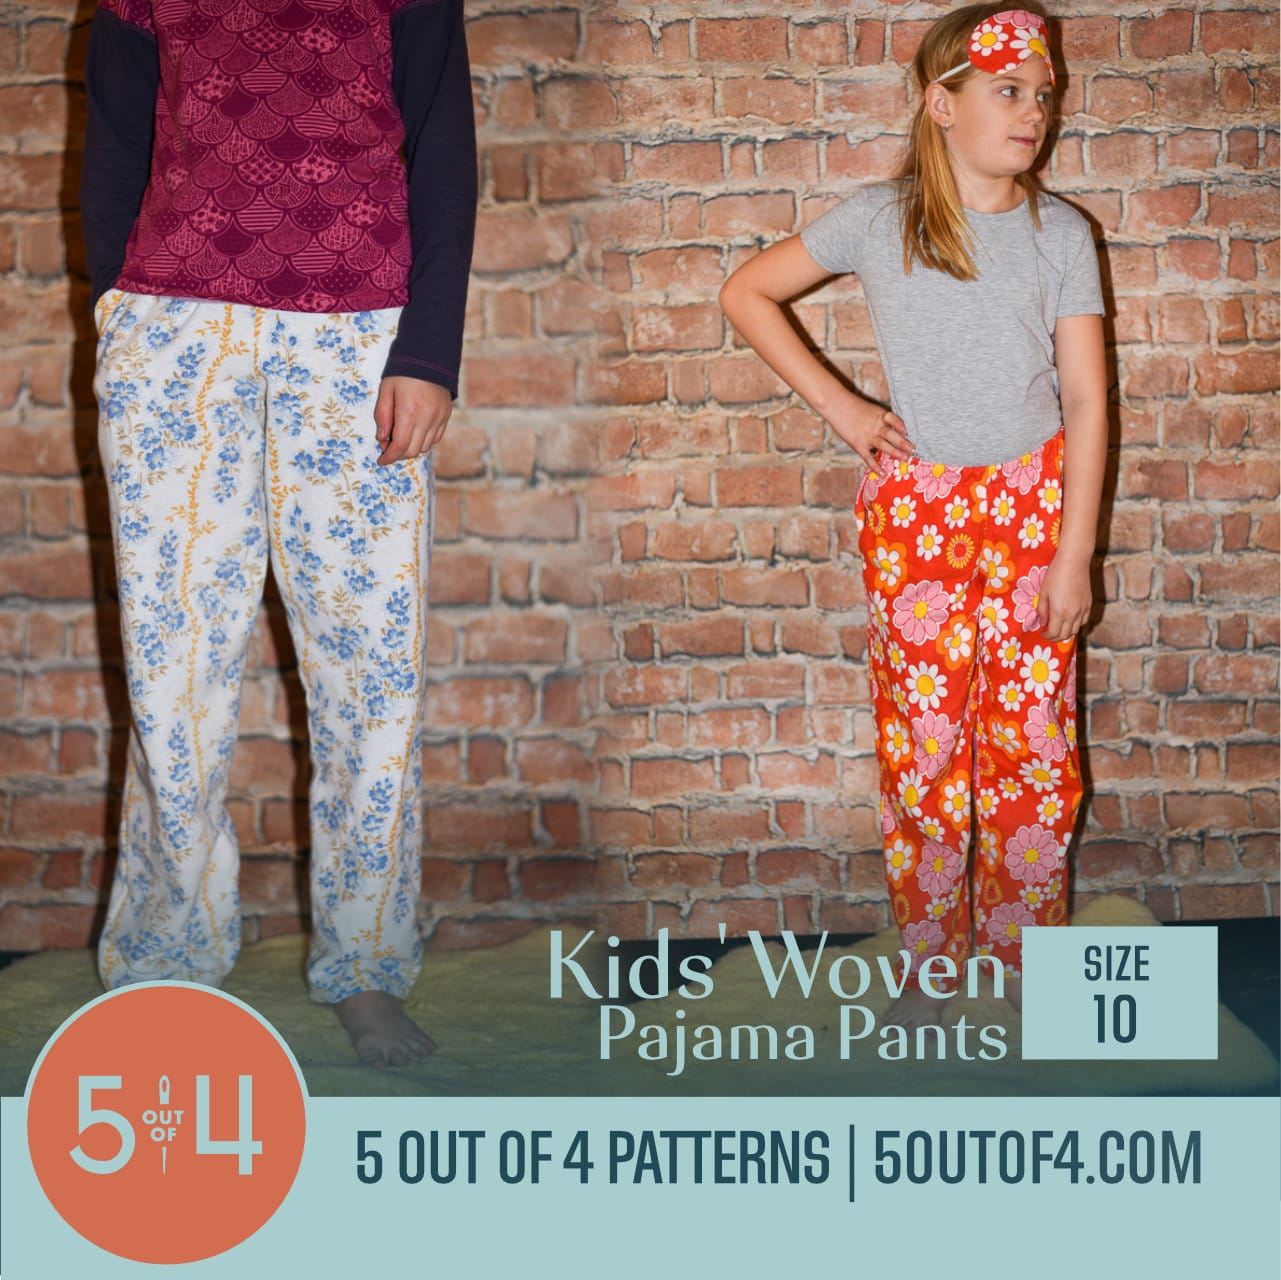 Ryker's Woven Skinny Pants Sizes 2T to 14 Kids and Dolls PDF Pattern